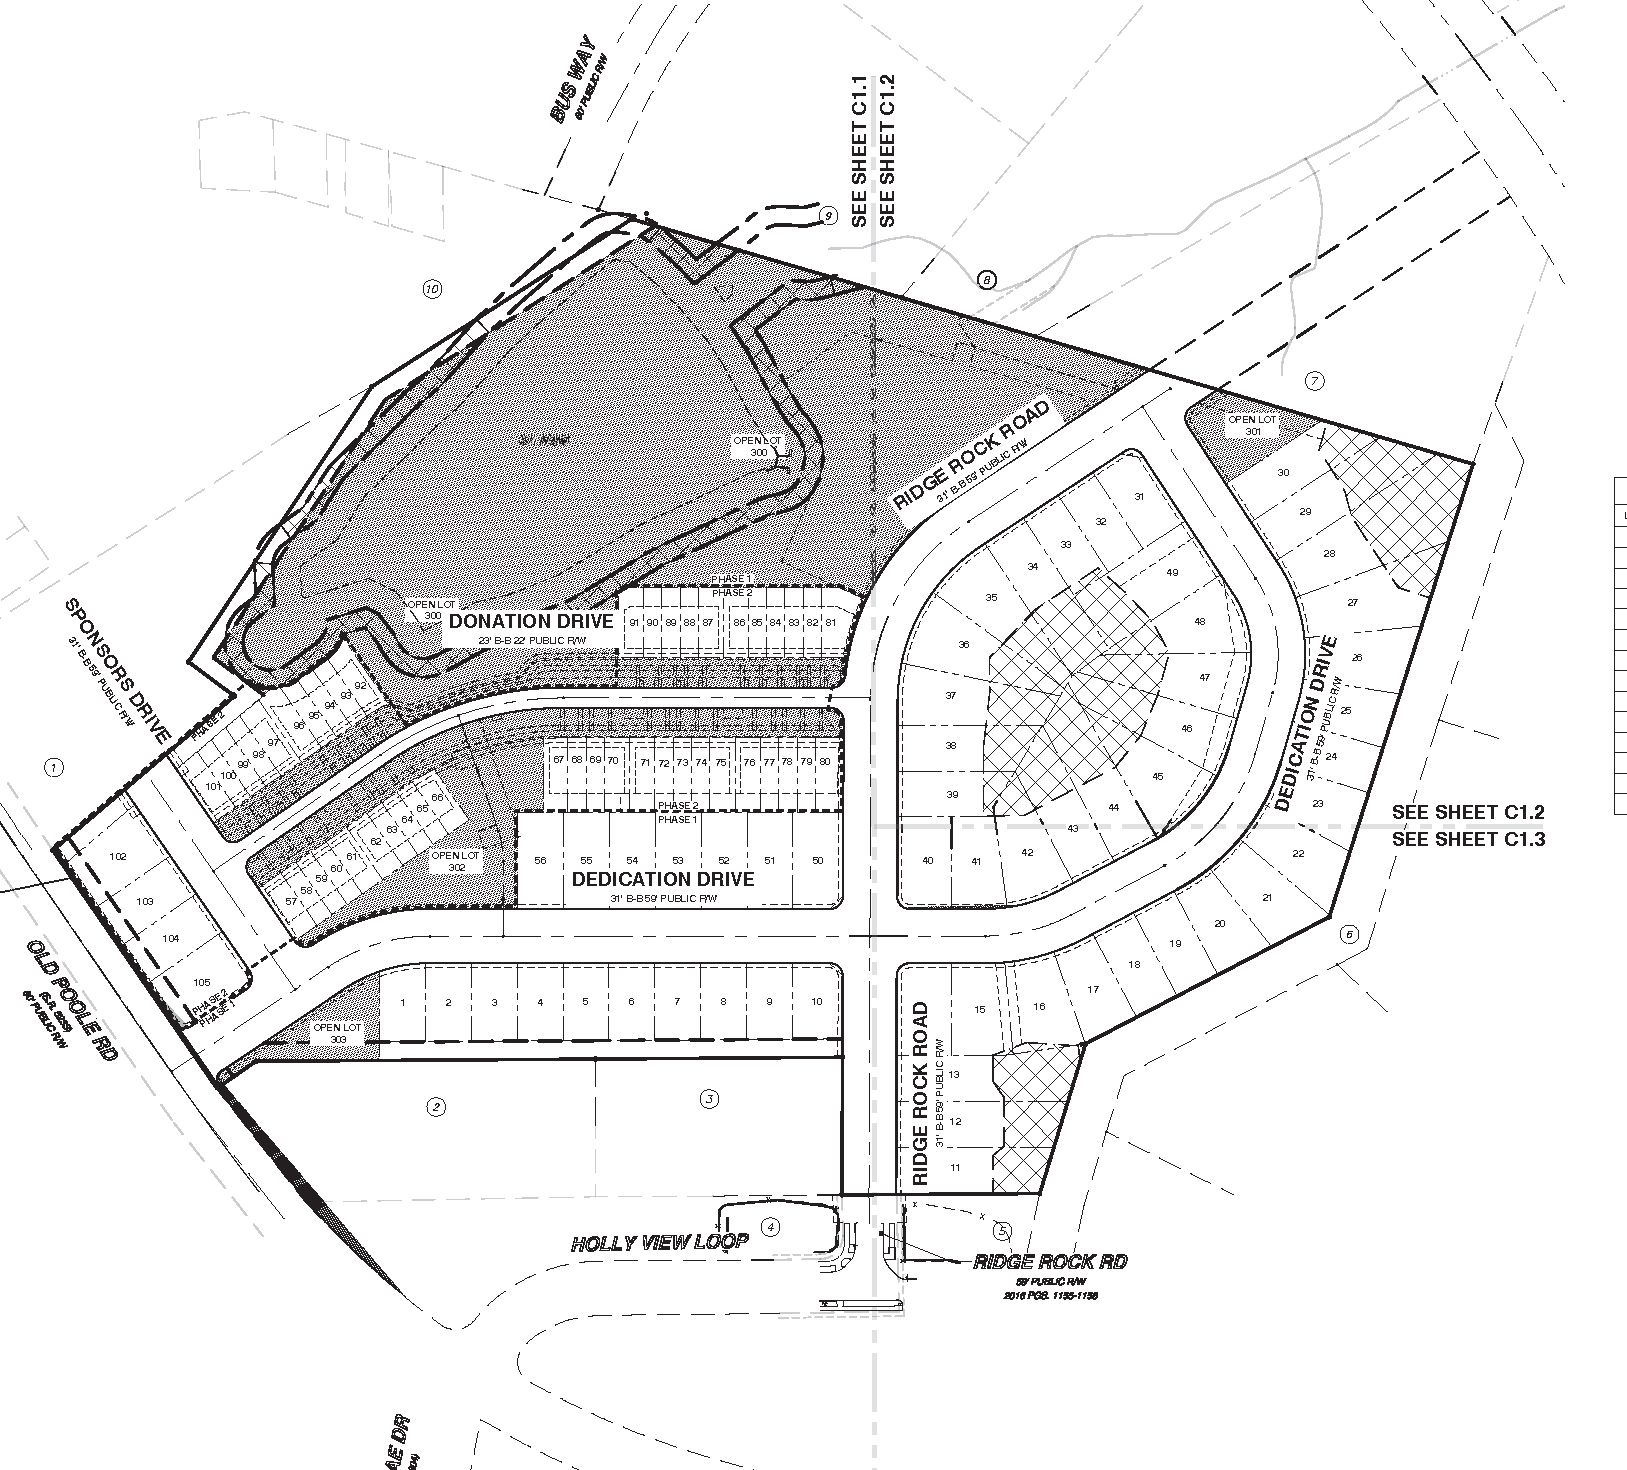 Old Poole site plan